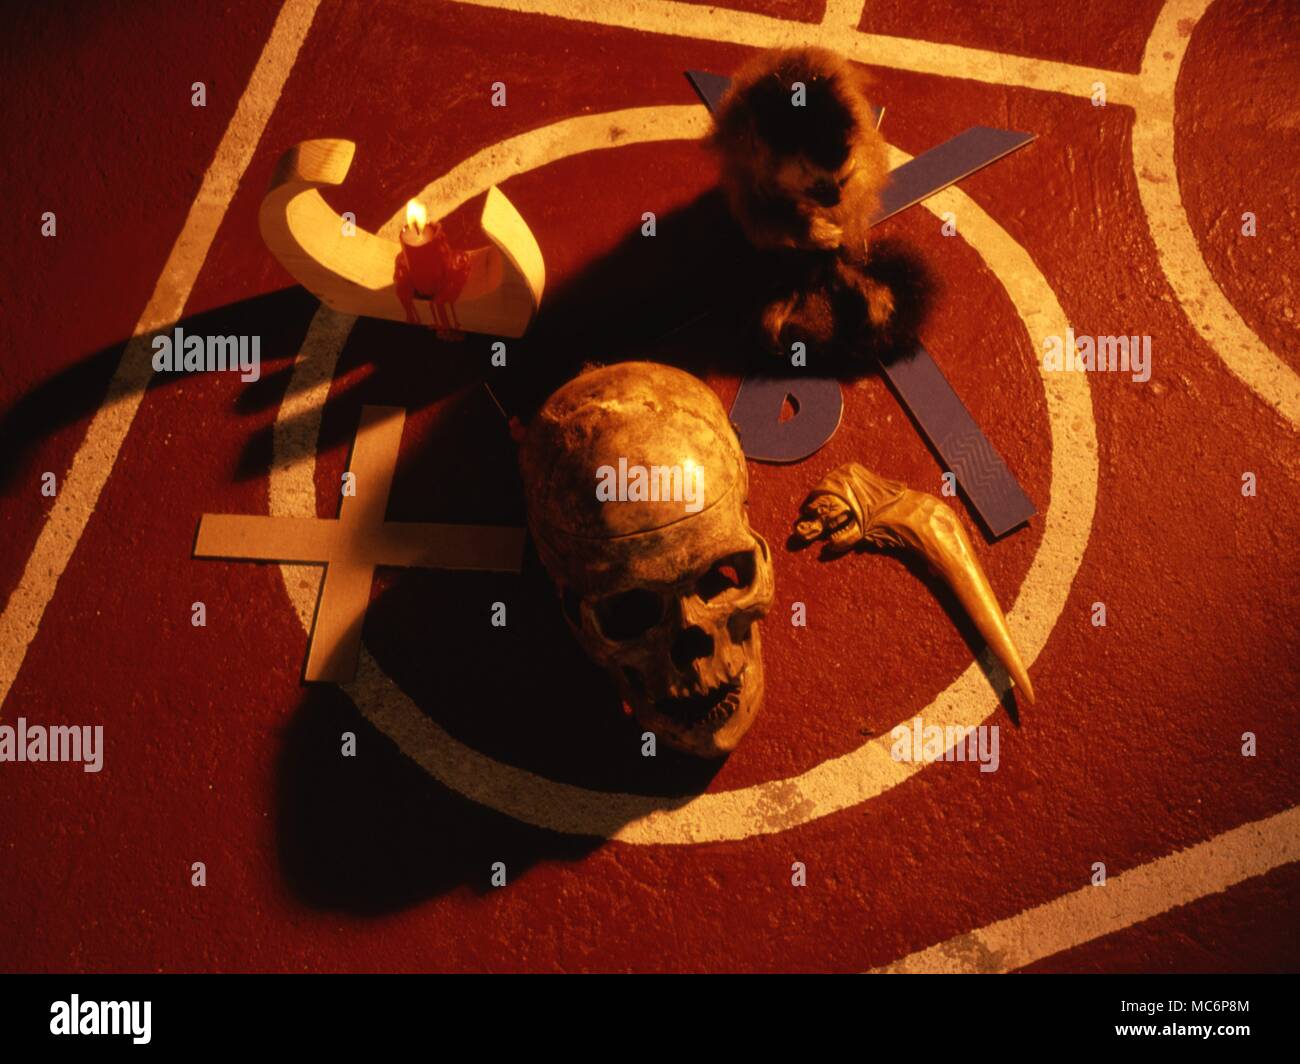 Ritual objects on a specially marked floor, in preparation for the ritual of the Rite of Thoth. The system was designed by Eliphas Levi. The objects include various symbols proposed by Levi, a candle, skull and stuffed marmoset, etc. Stock Photo